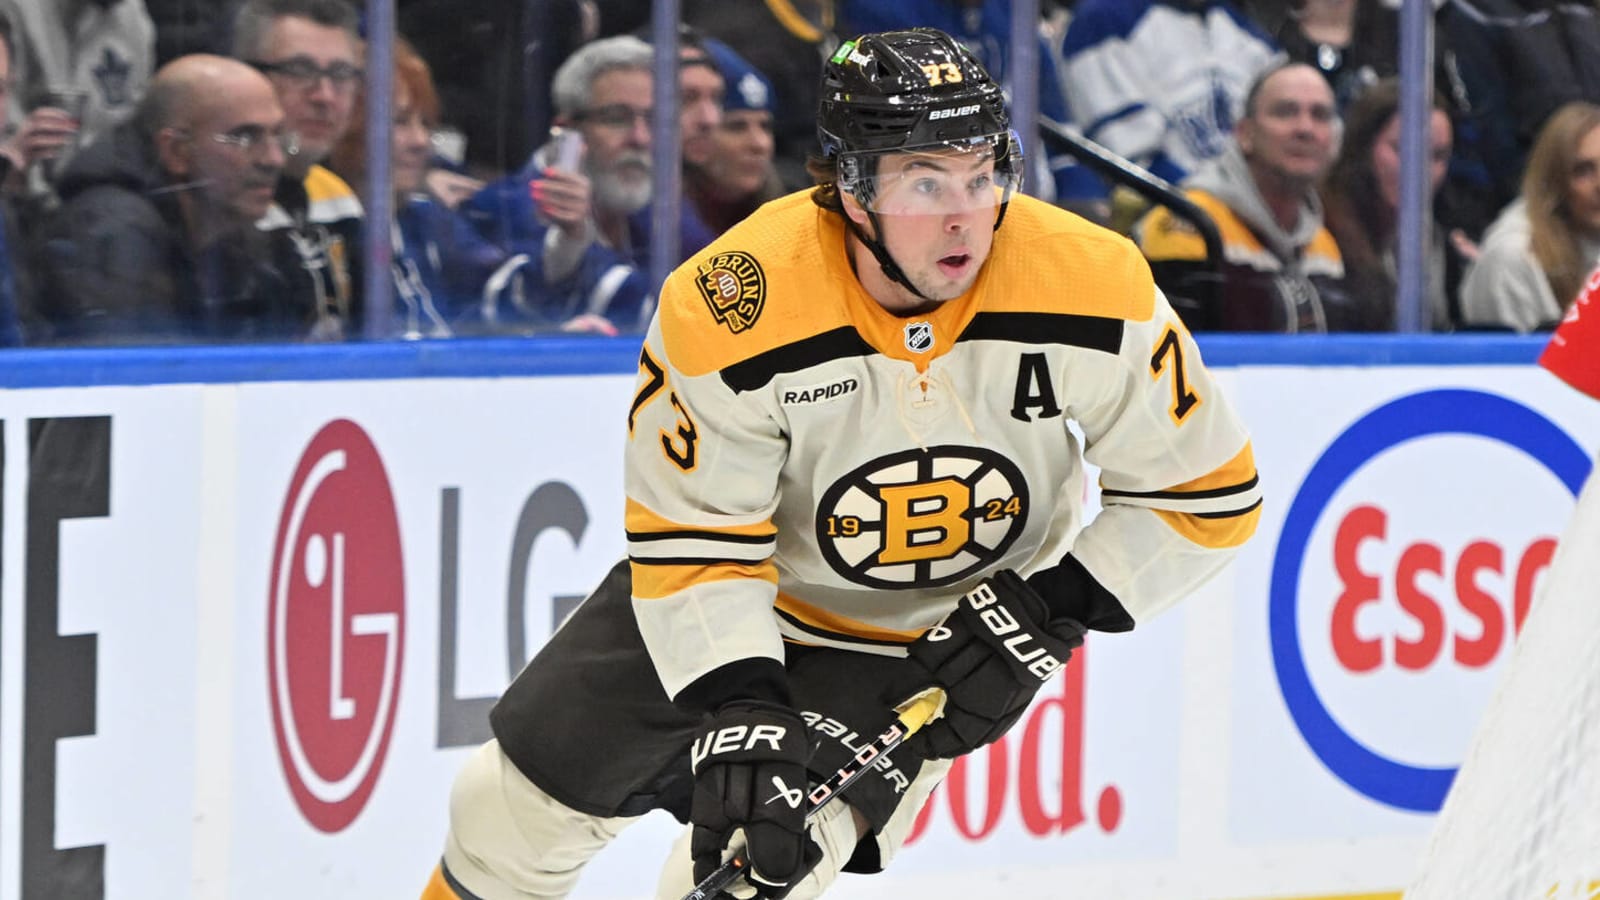 Bruins All-Star defenseman out day-to-day with injury